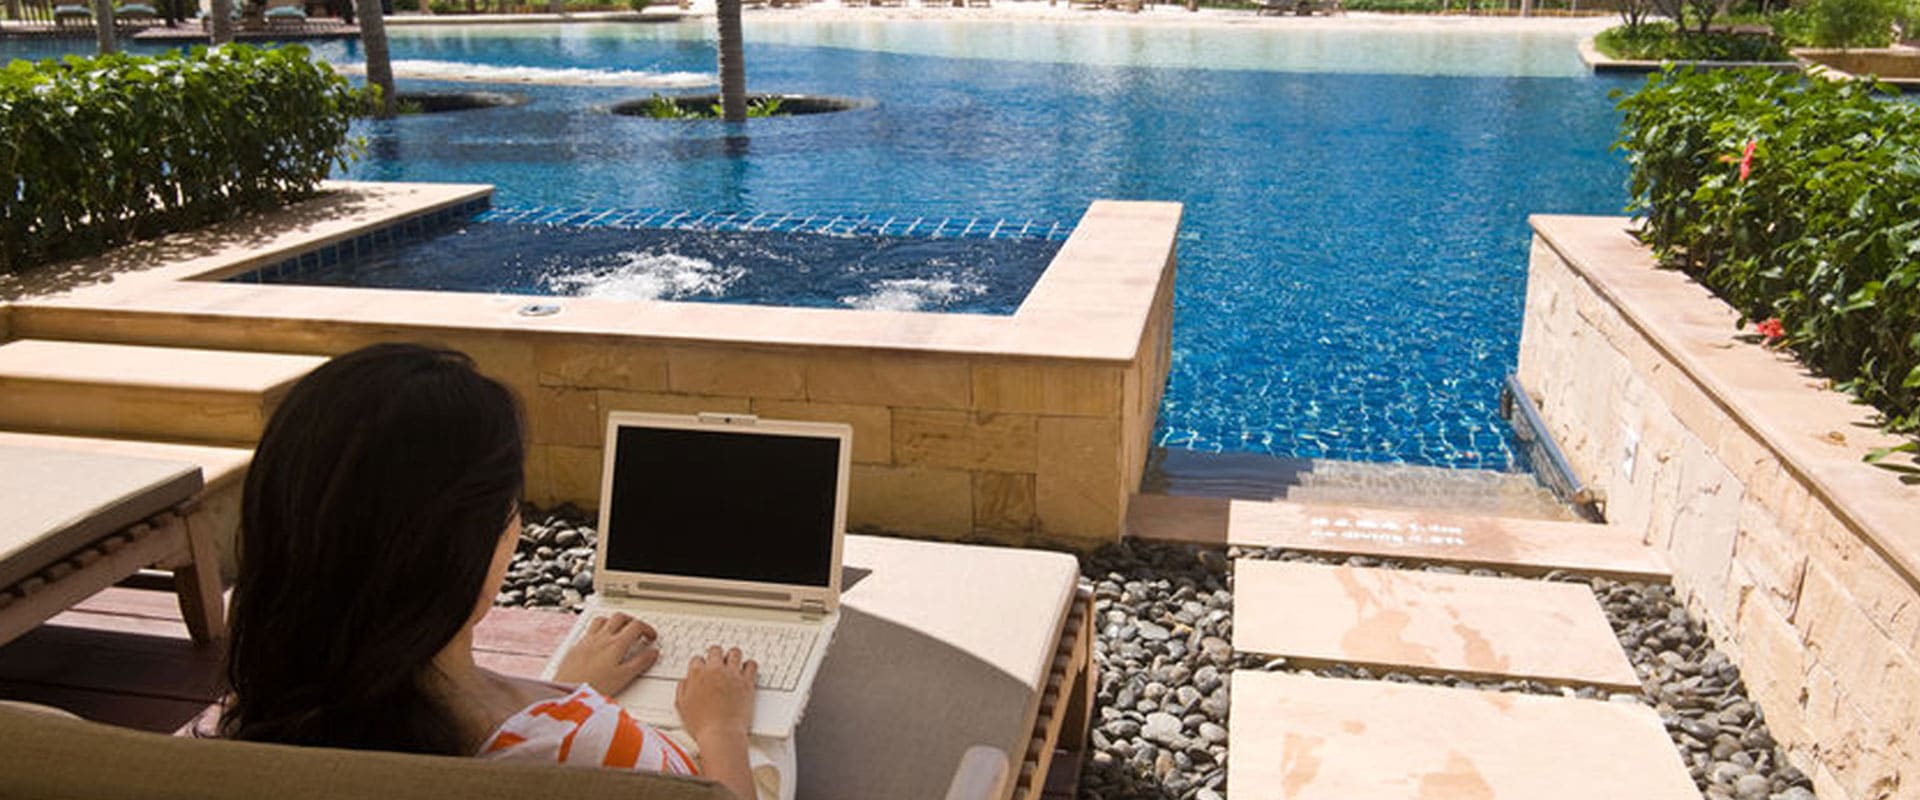 Surfing the Web by the Pool